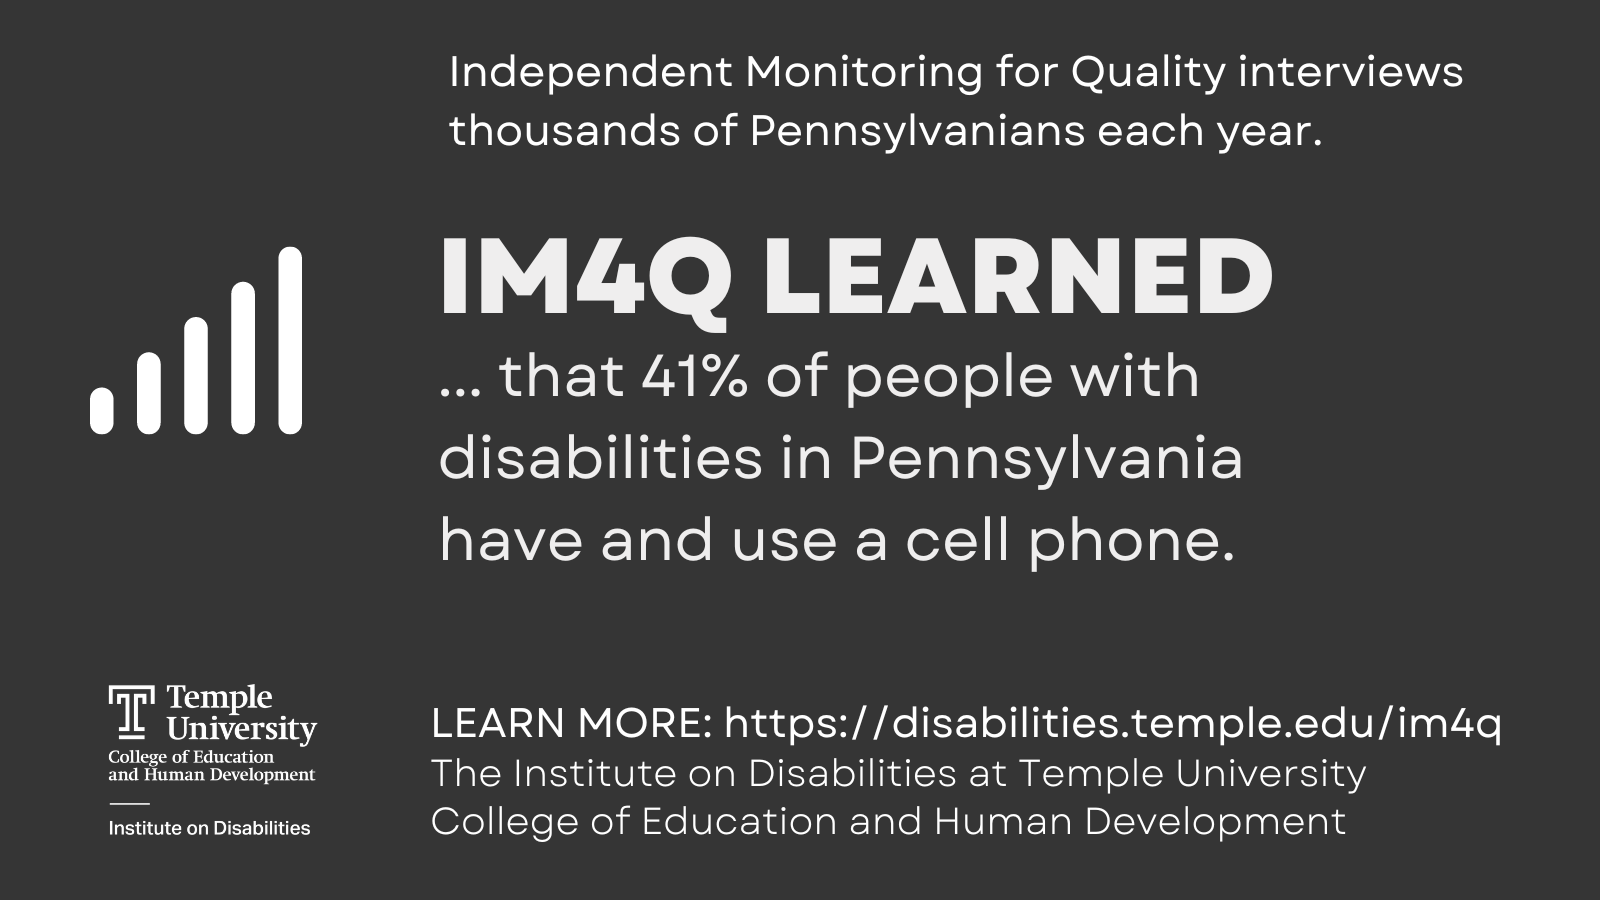 41% of people with disabilities have and use a cell phone.